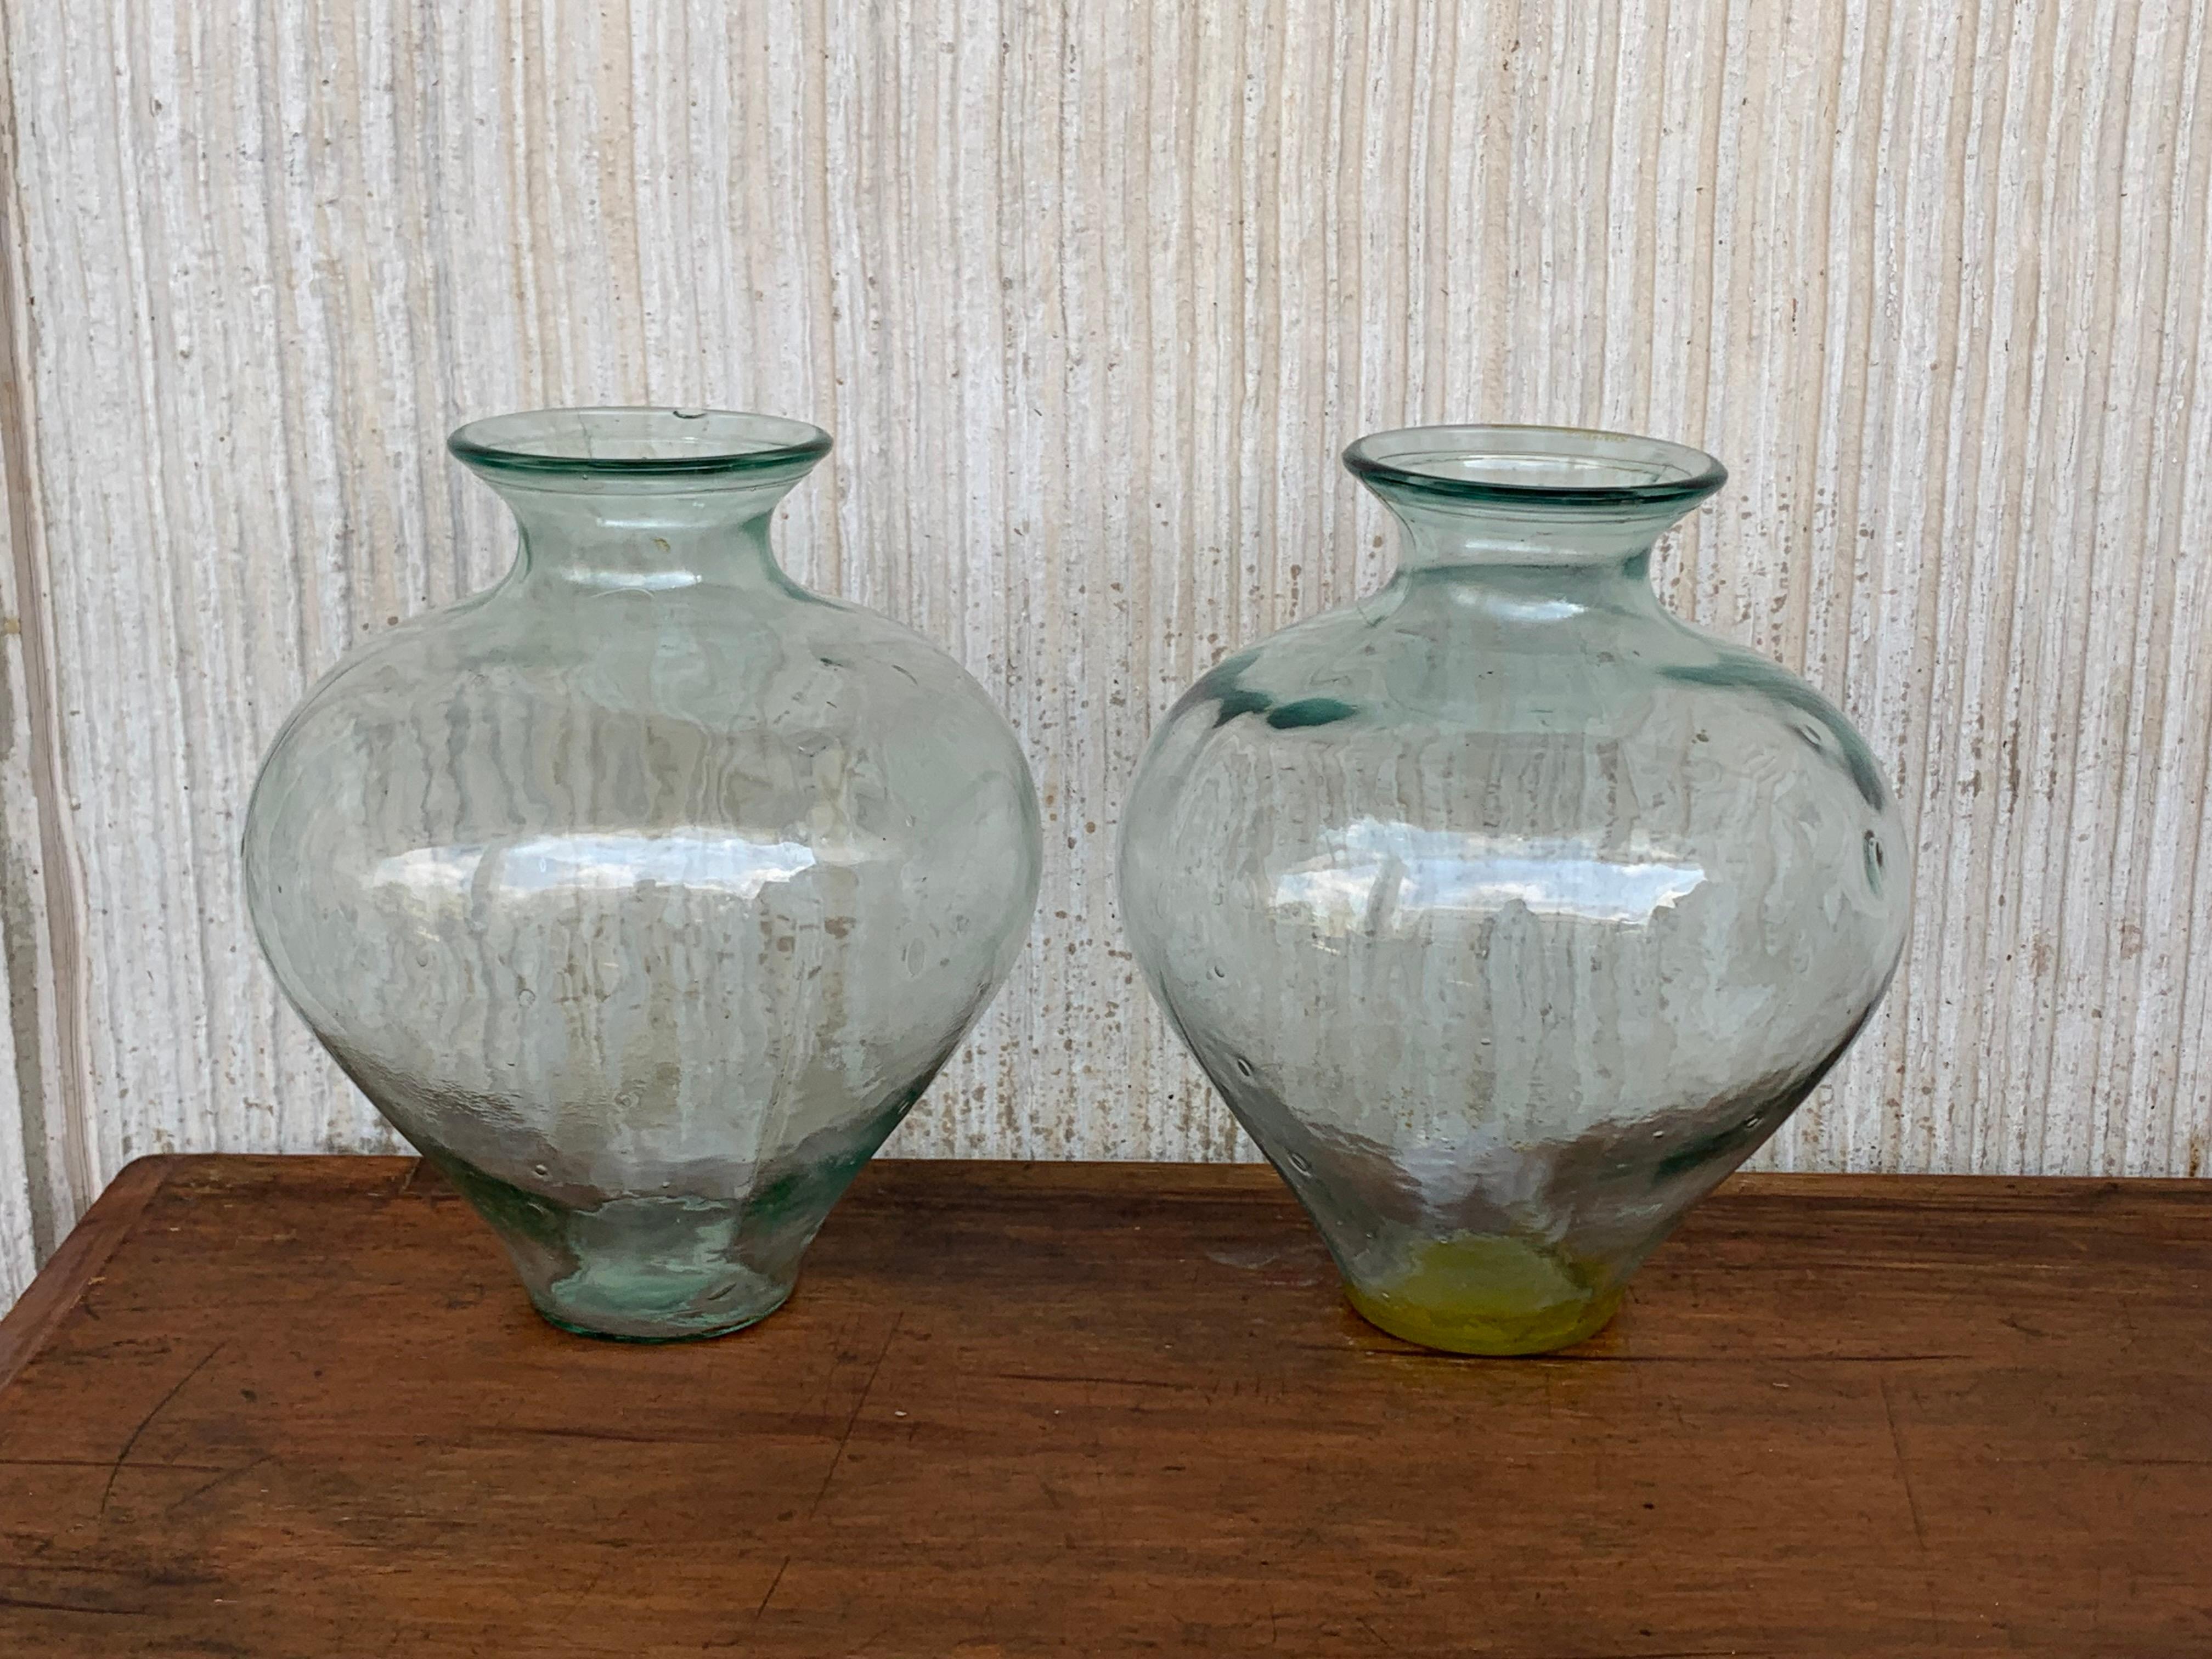 Set of 2 Green Glass French Demijohn Bottles with Woven Esparto Basket For Sale 1